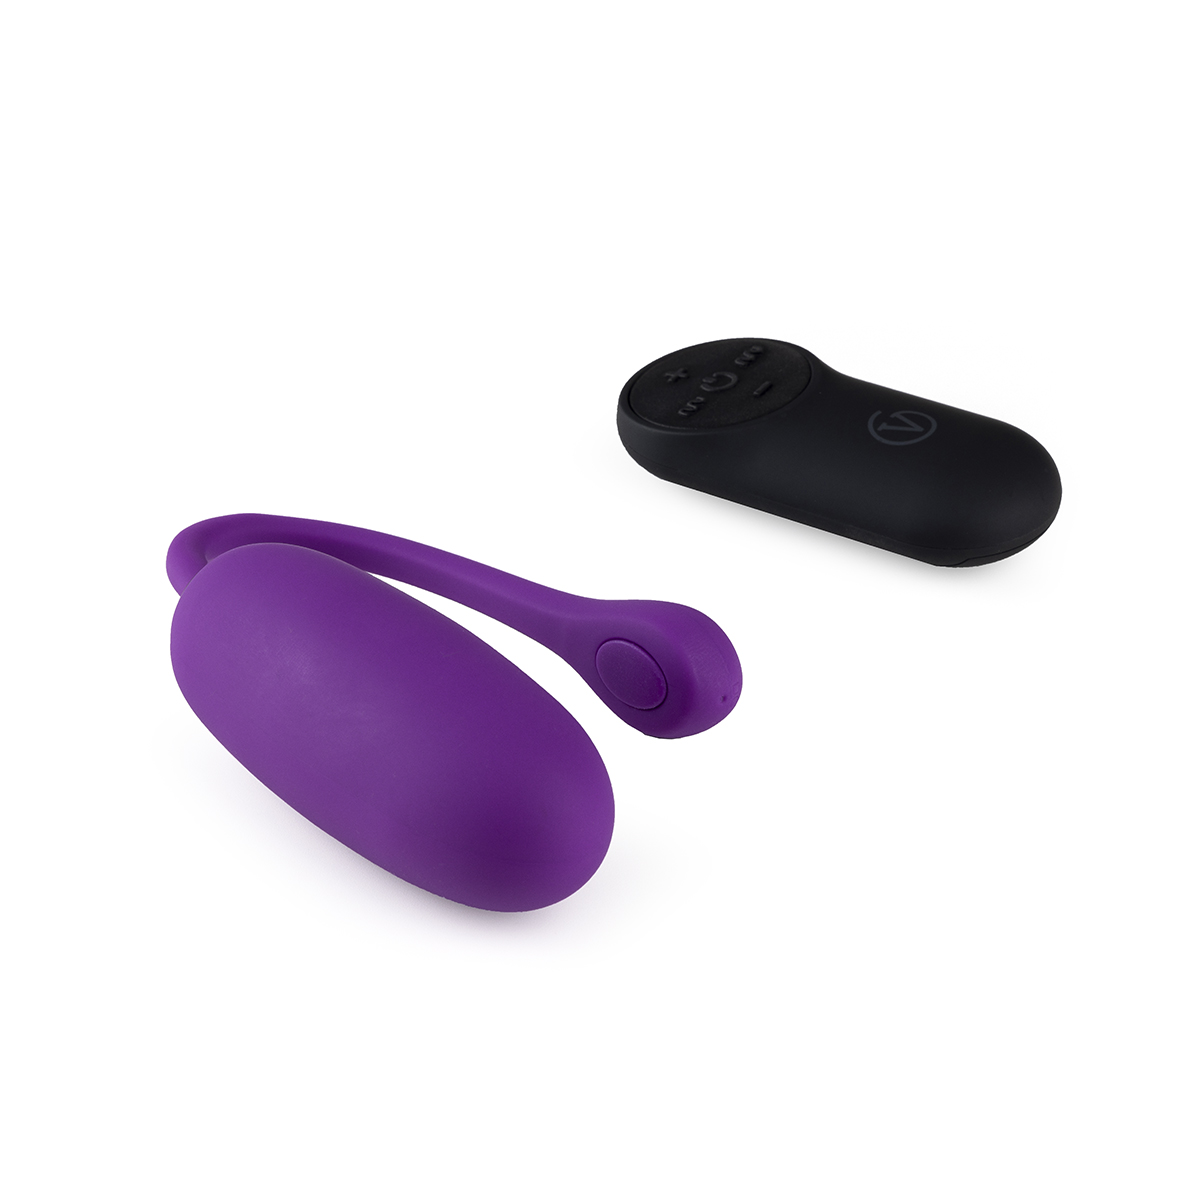 Rechargeable Remote Control Egg G7 – Purple